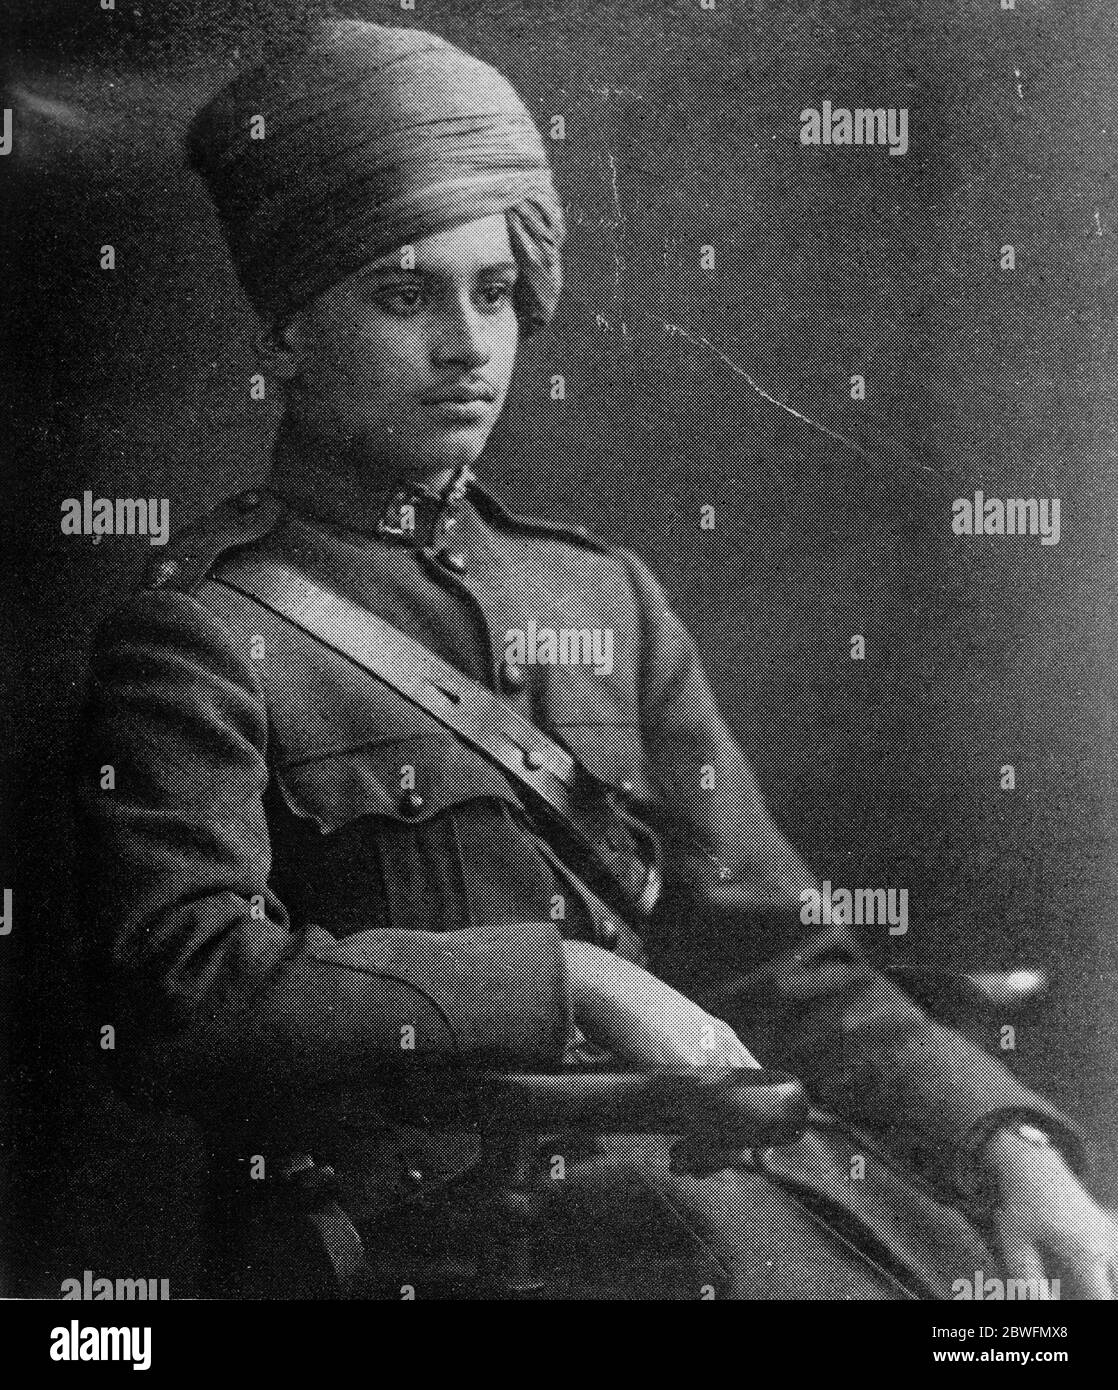 The Maharajah of Jodhpur who is at present in London 14 April 1925 Stock Photo